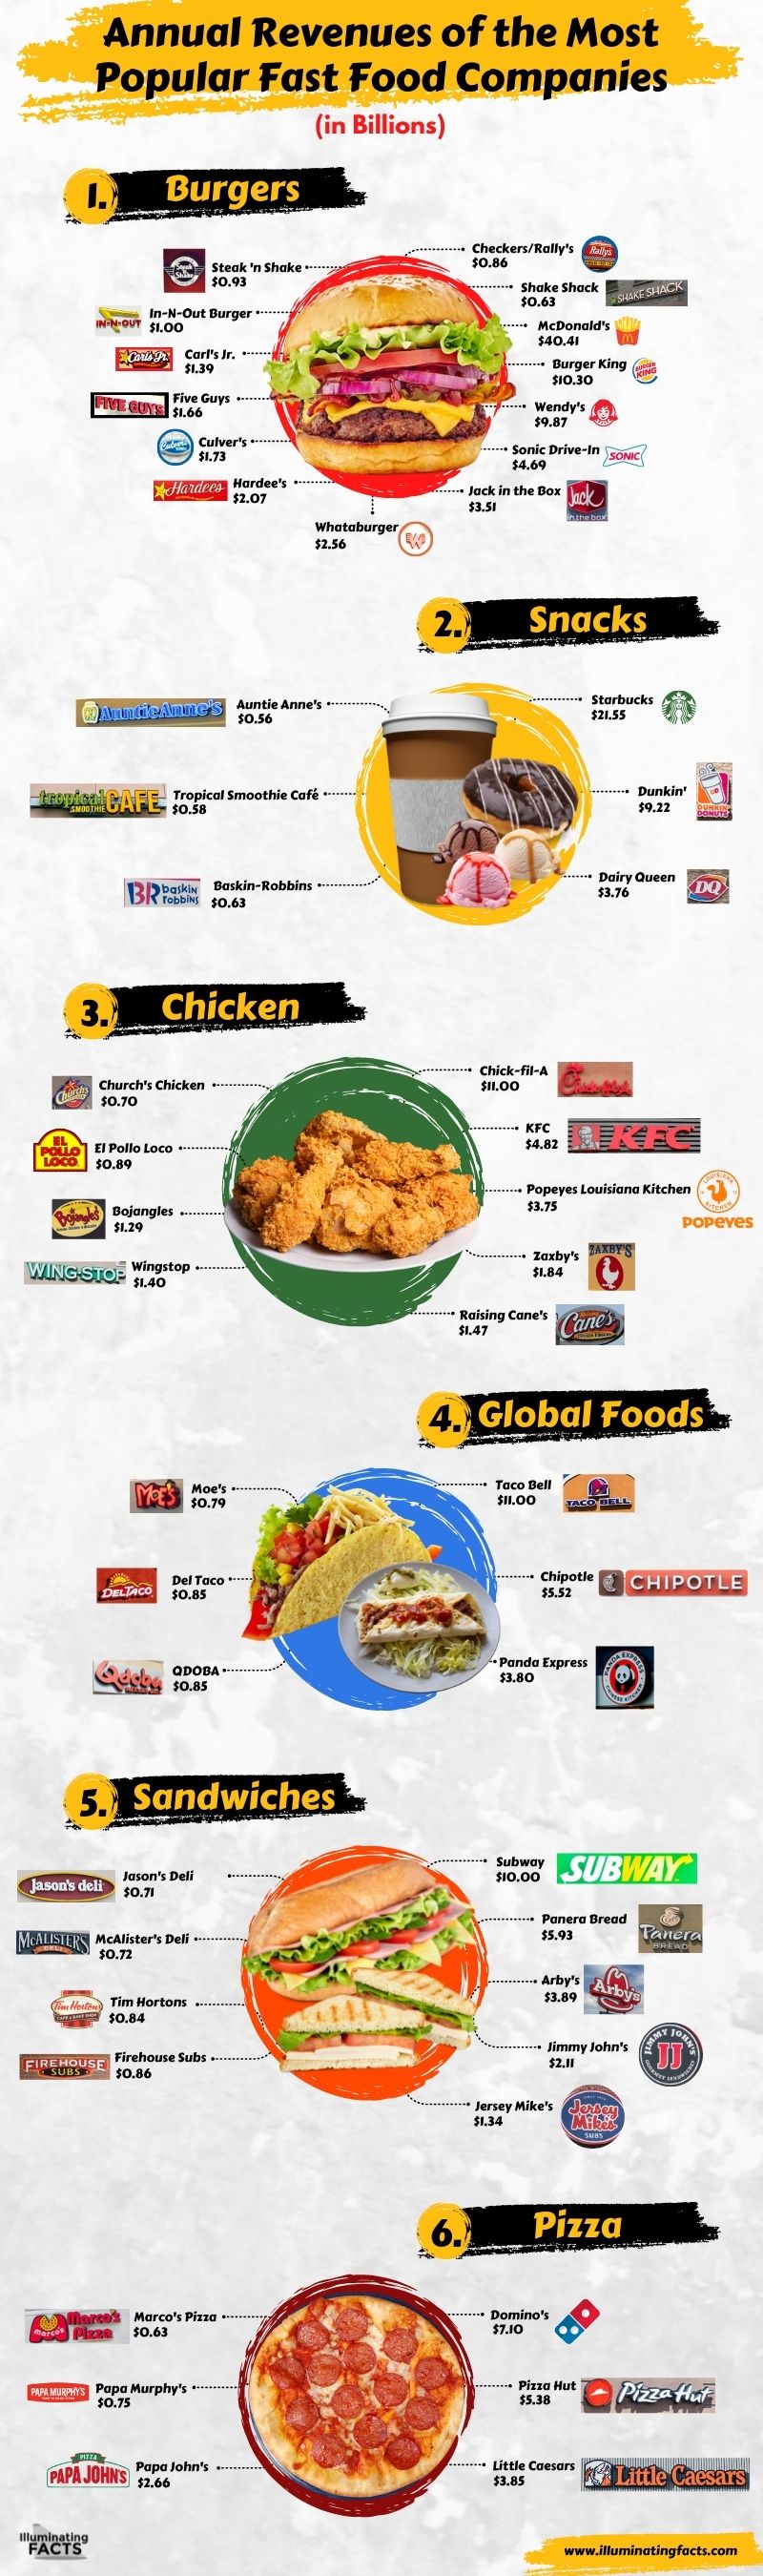 Annual Revenues of the Most Popular Fast Food Companies